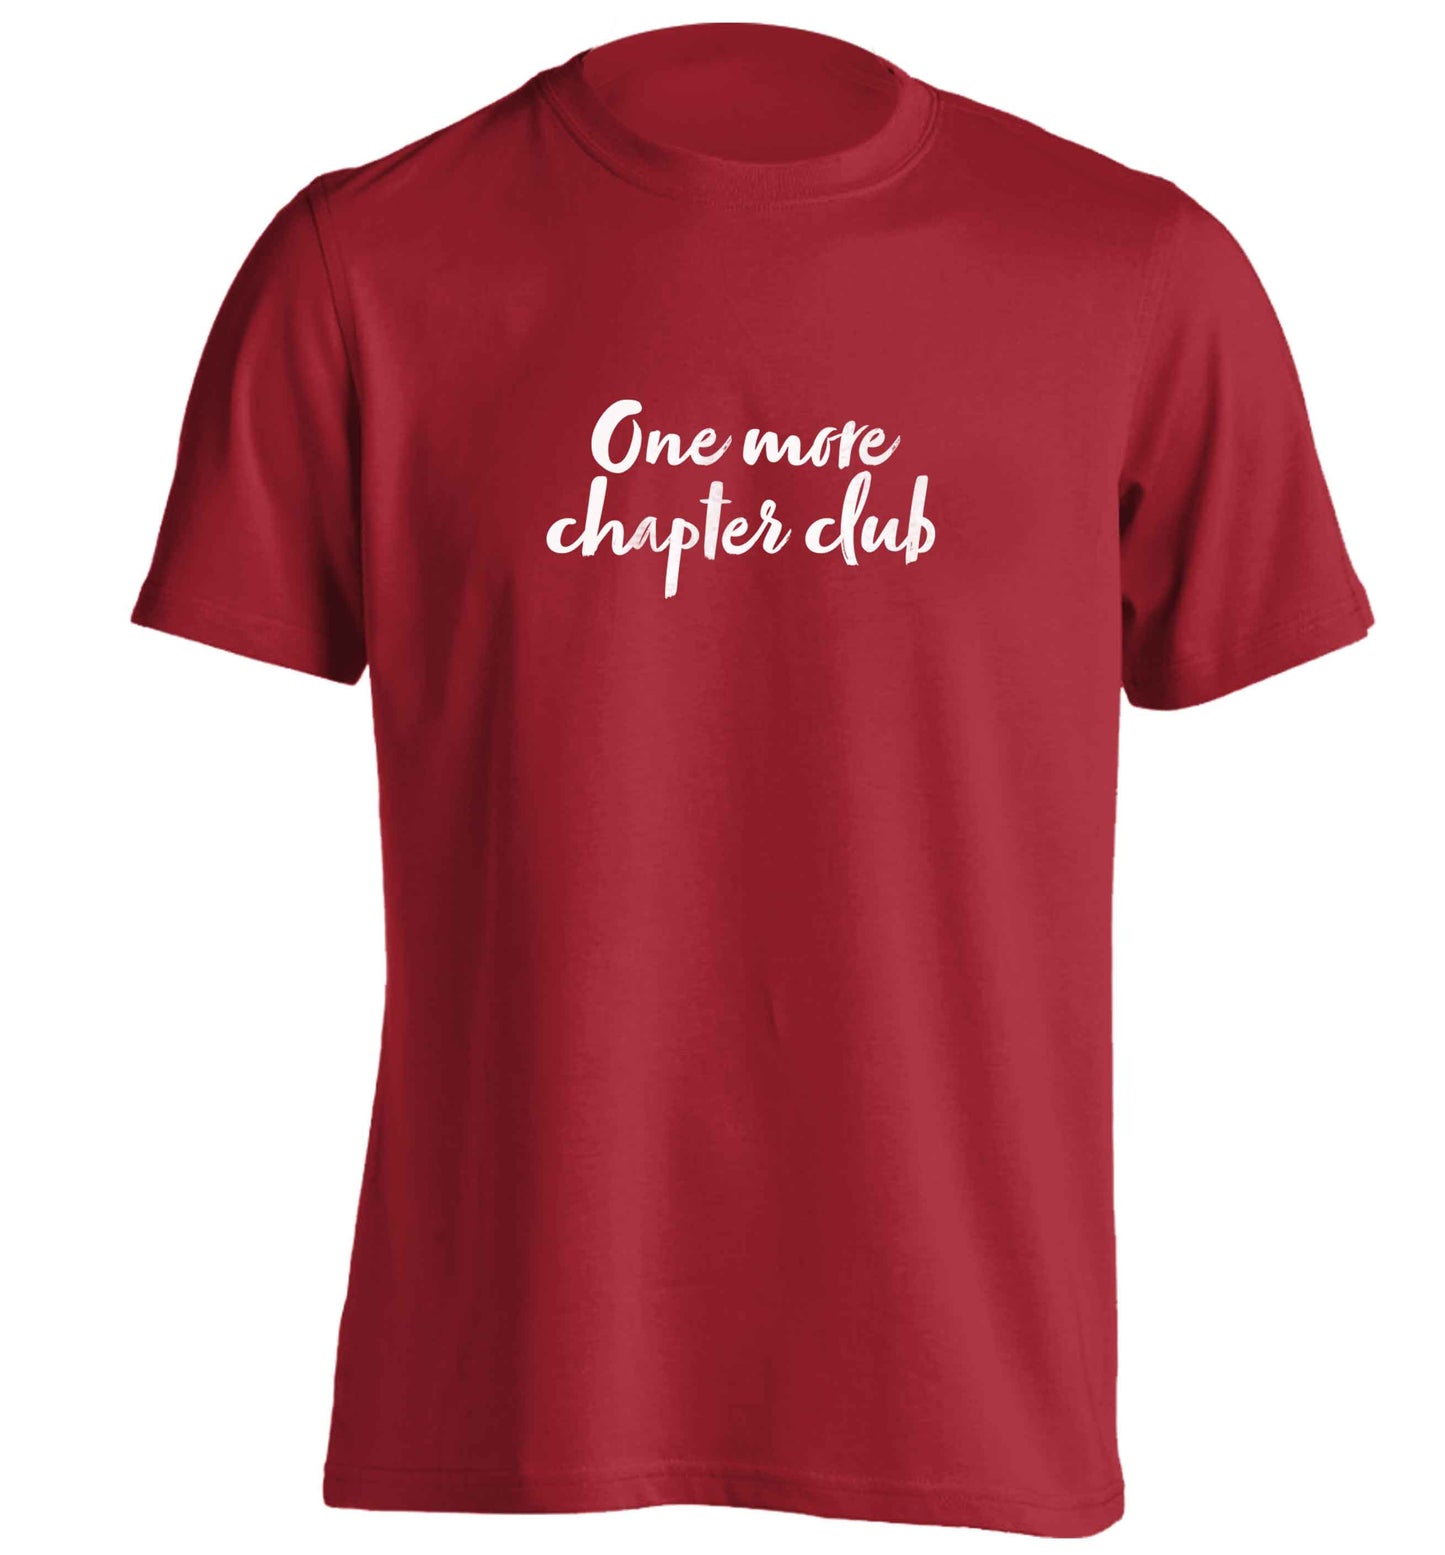 One more chapter club Kit adults unisex red Tshirt 2XL